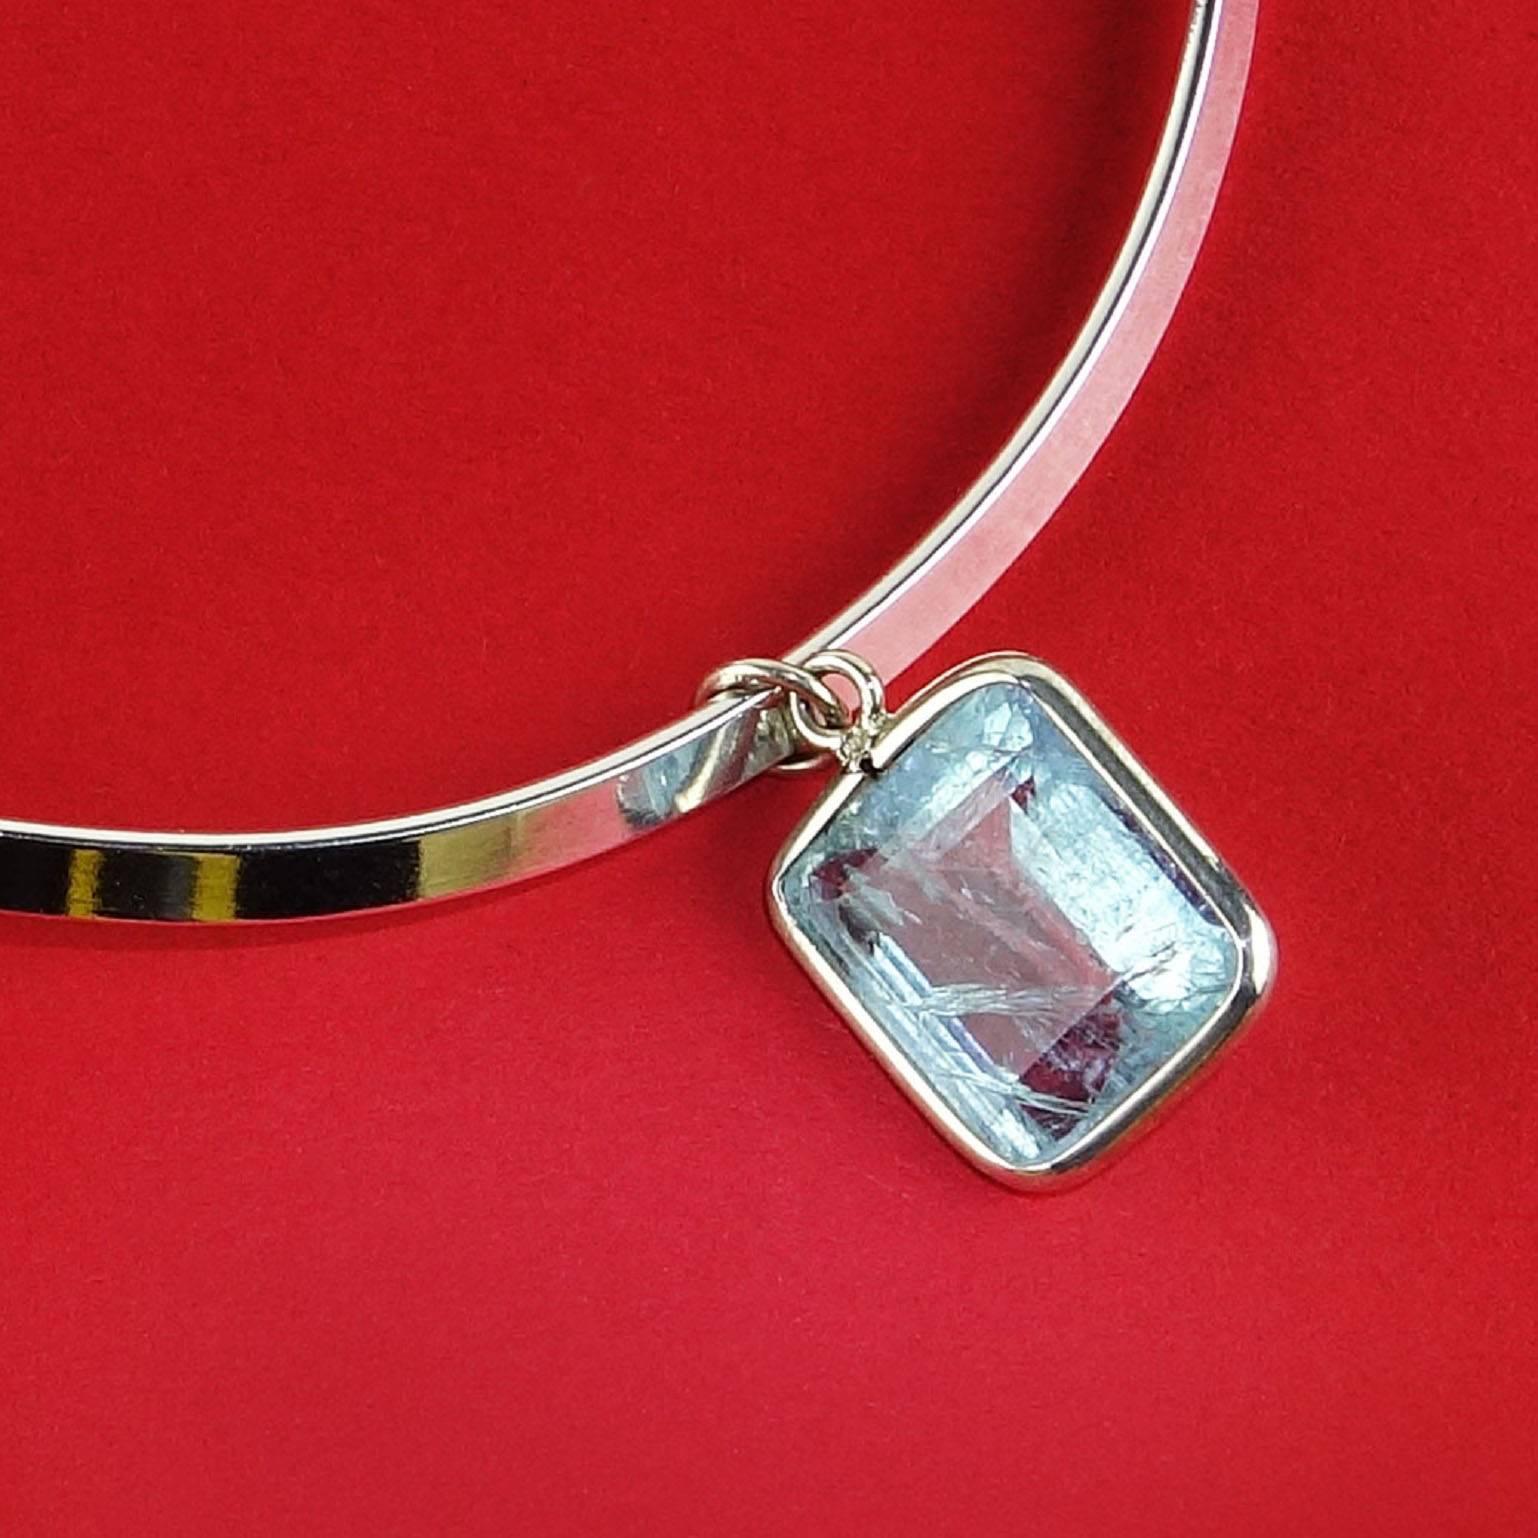 Bright Emerald cut Aquamarine Pendant bezel set in Sterling Silver (17 x 13 mm). Aquamarine is always a favorite gemstone, but especially for all you March babies. Grab this one, it's a beauty!
This pendant comes on its own silver collar.  